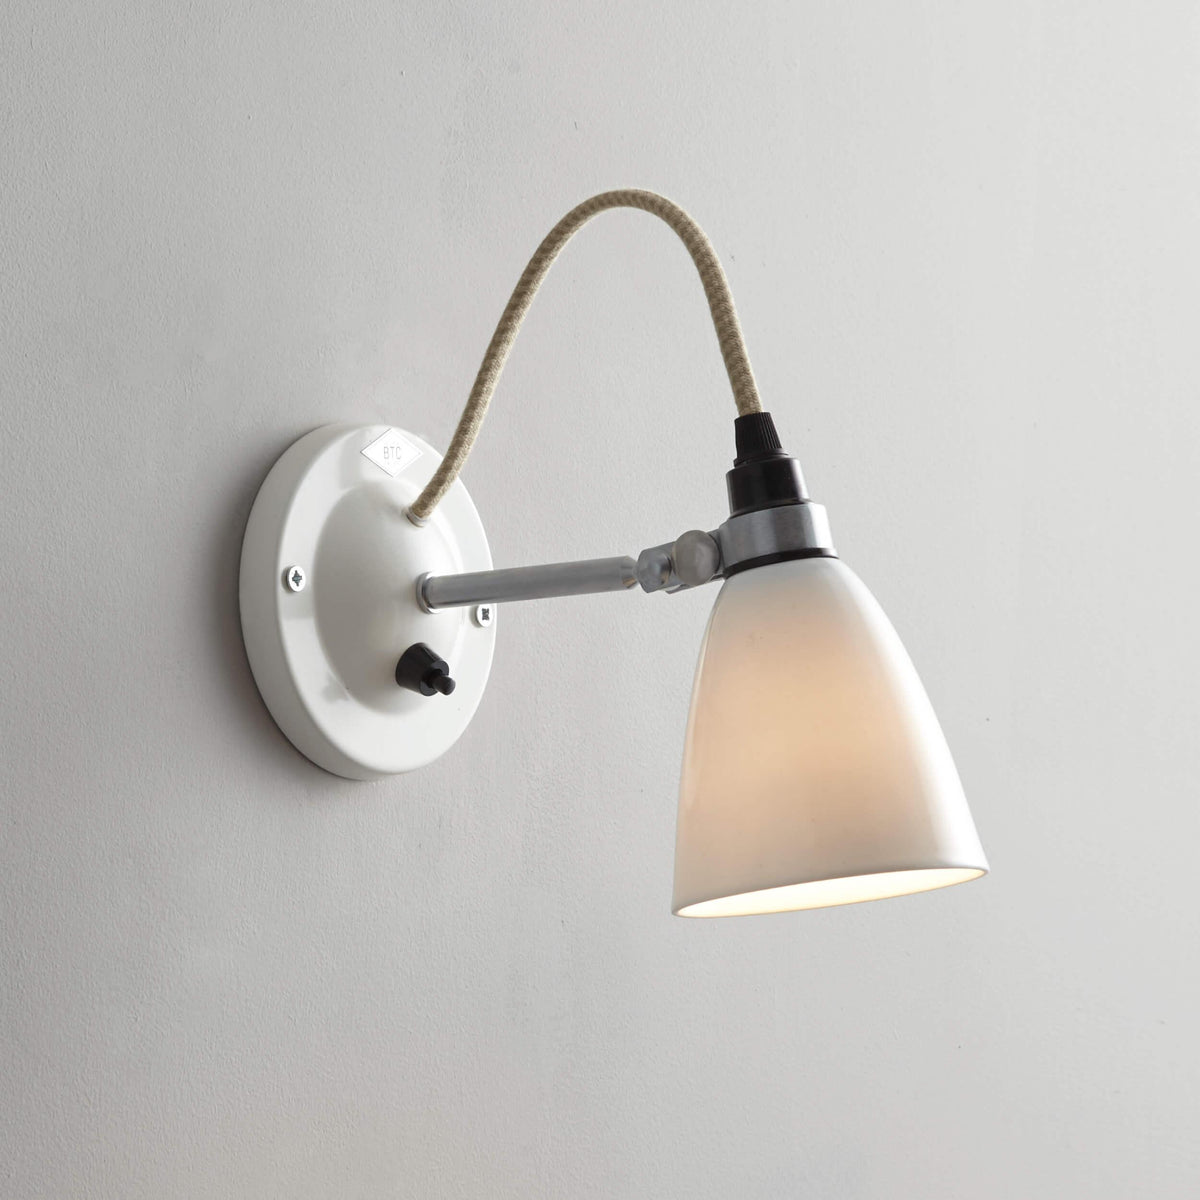 Original BTC - Hector Switched Small Dome Wall Light - US-FW396N | Montreal Lighting & Hardware